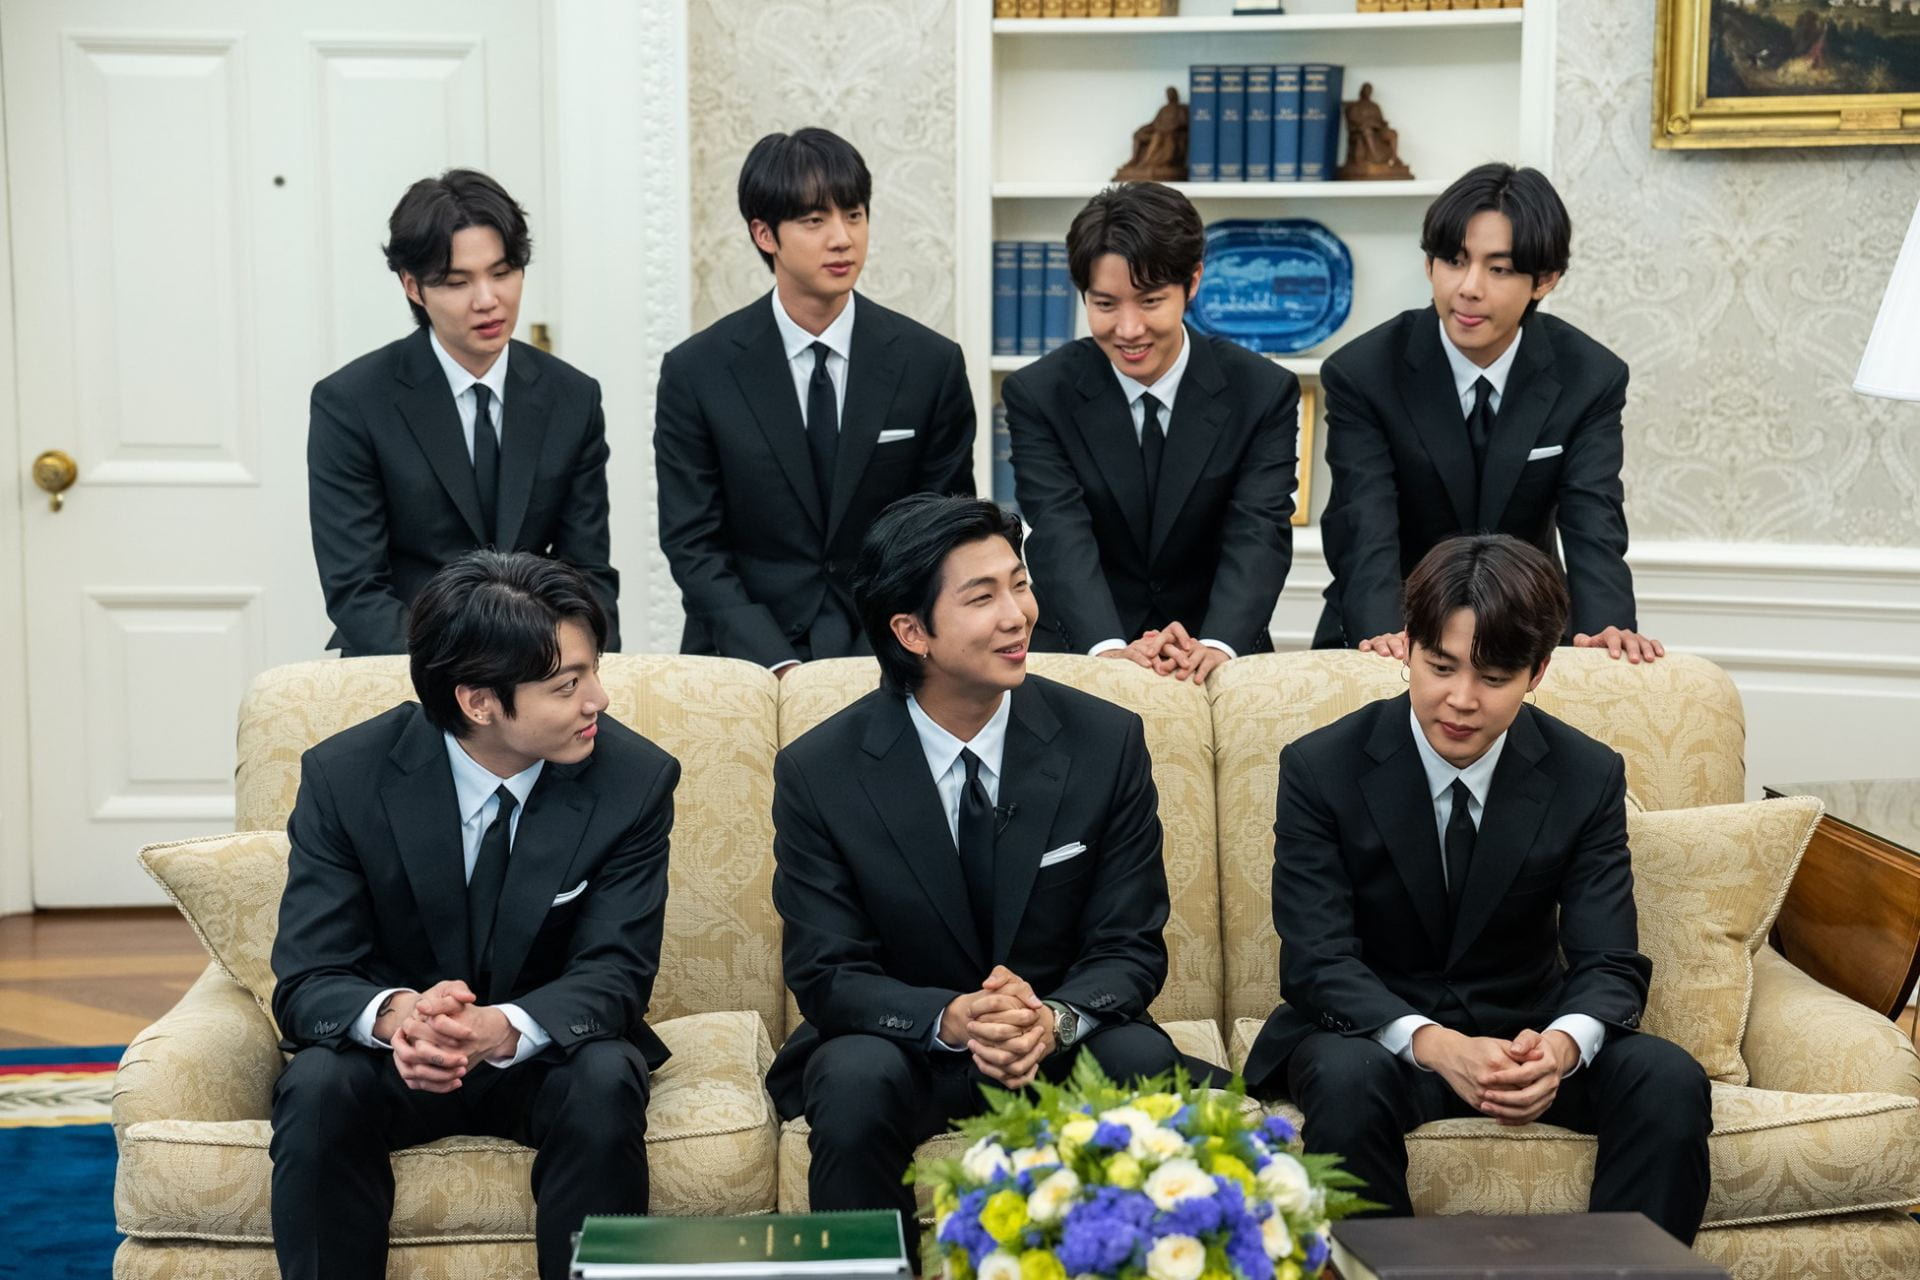 Members of BTS, dressed in suits, in the Oval Office.